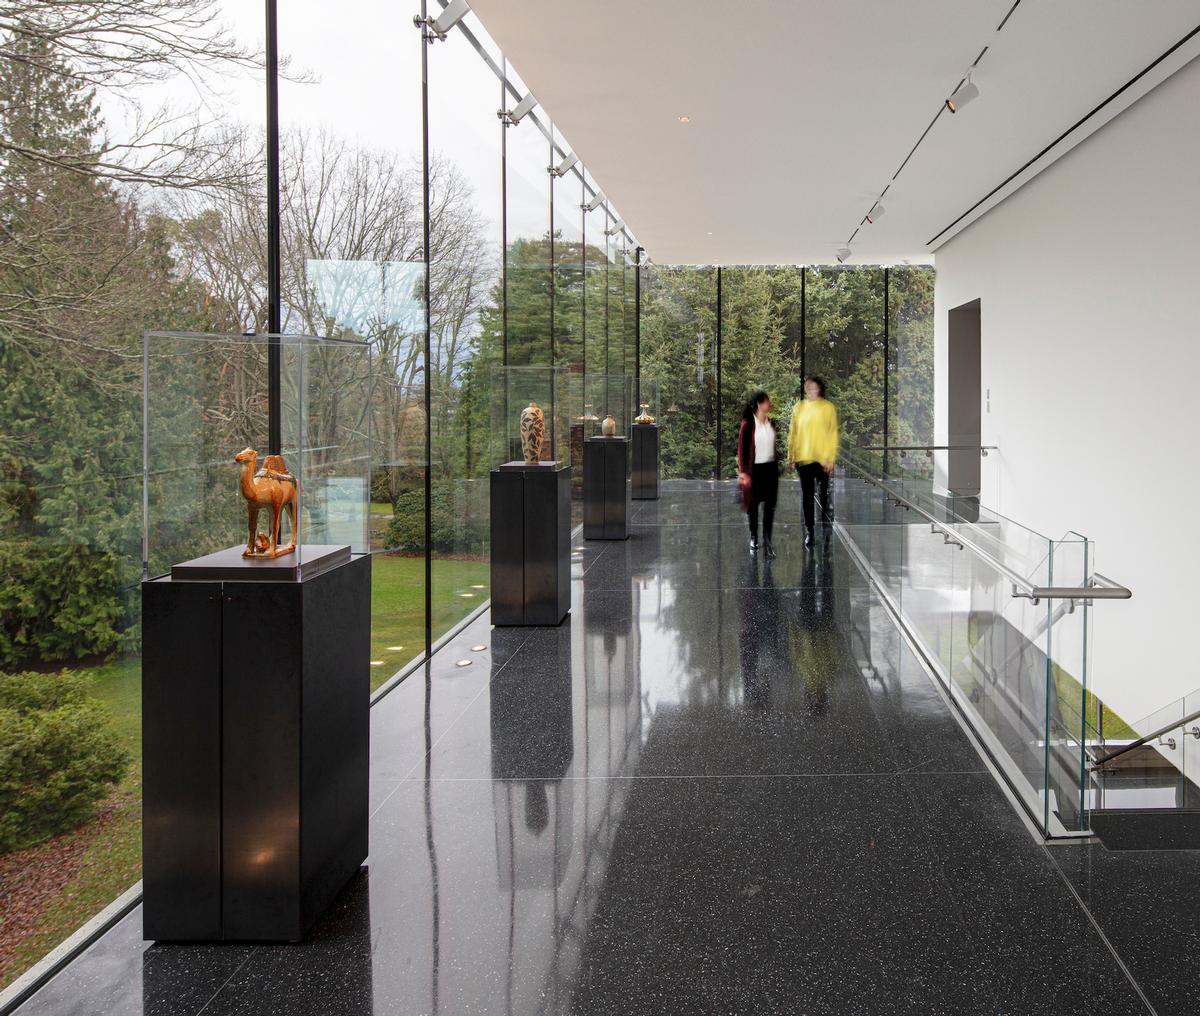 A new Park Lobby has been added to the building / Adam Hunter/LMN Architects